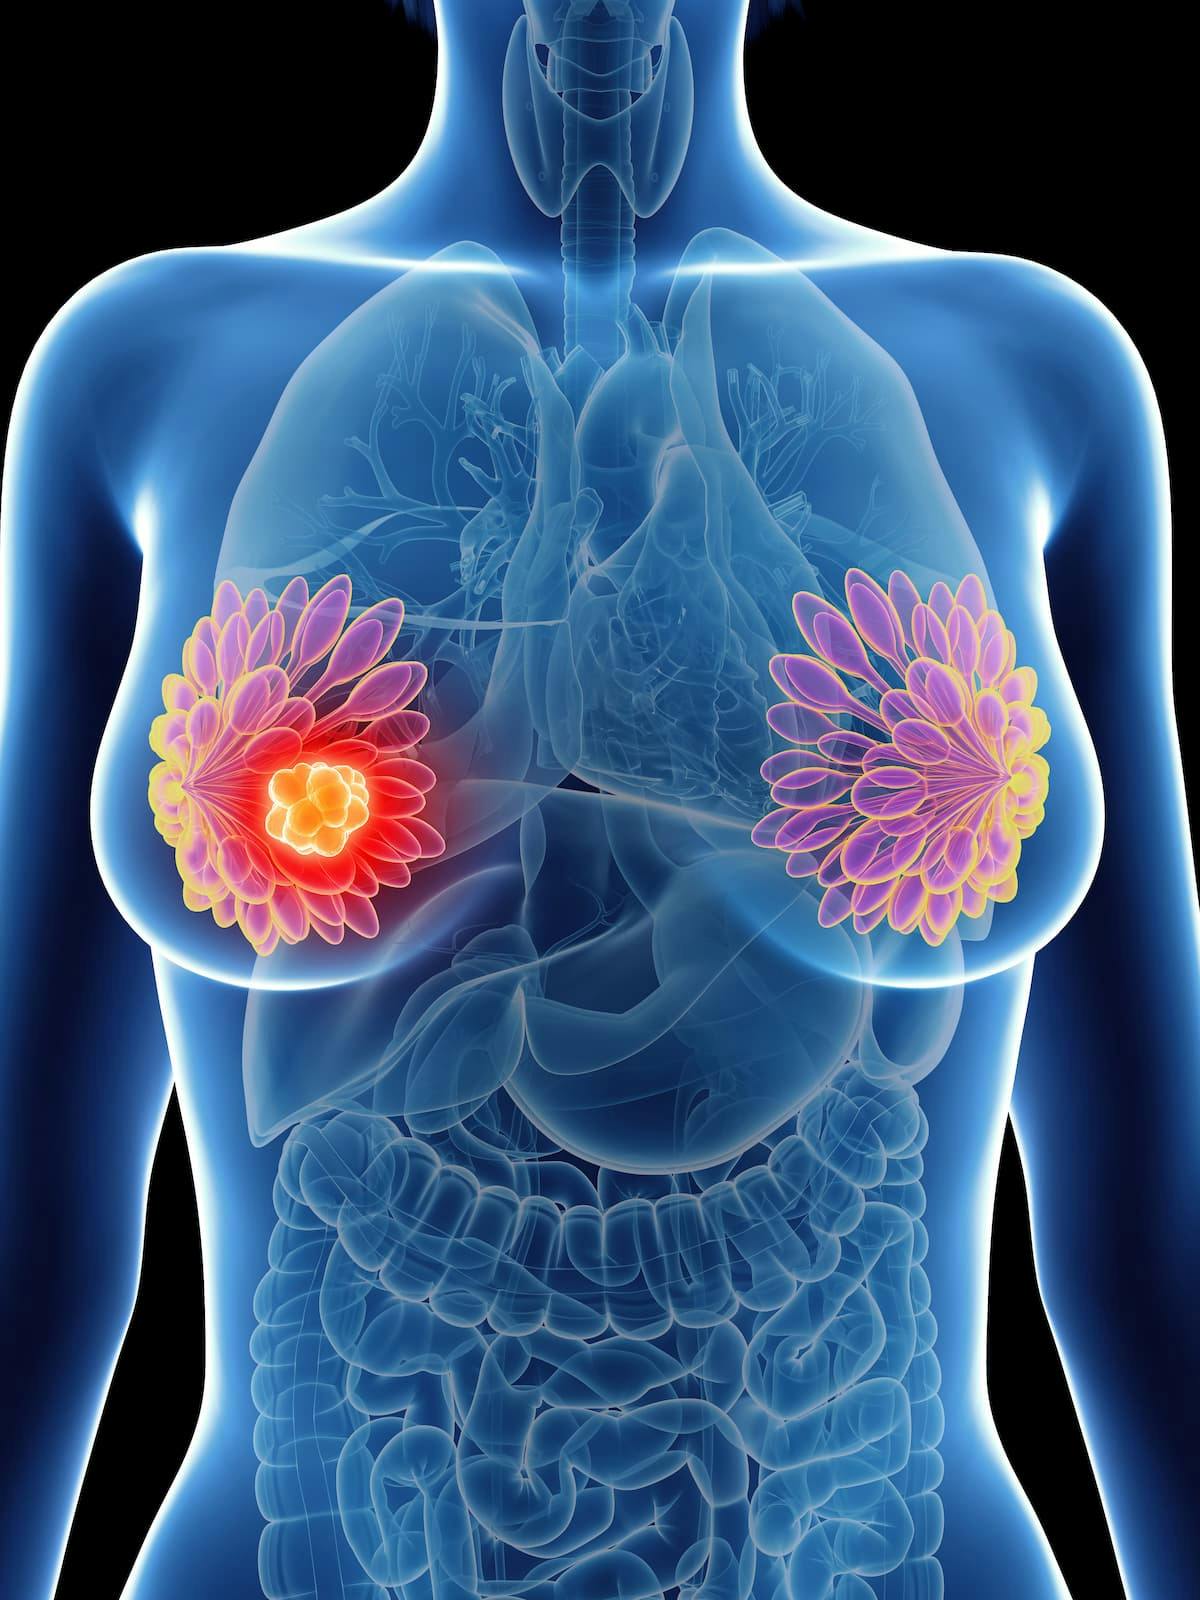 "These results demonstrate that the combined use of the monoclonal antibody toripalimab with traditional chemotherapy significantly prolonged the PFS of patients [with TNBC]," according to an expert from the Chinese People’s Liberation Army General Hospital.